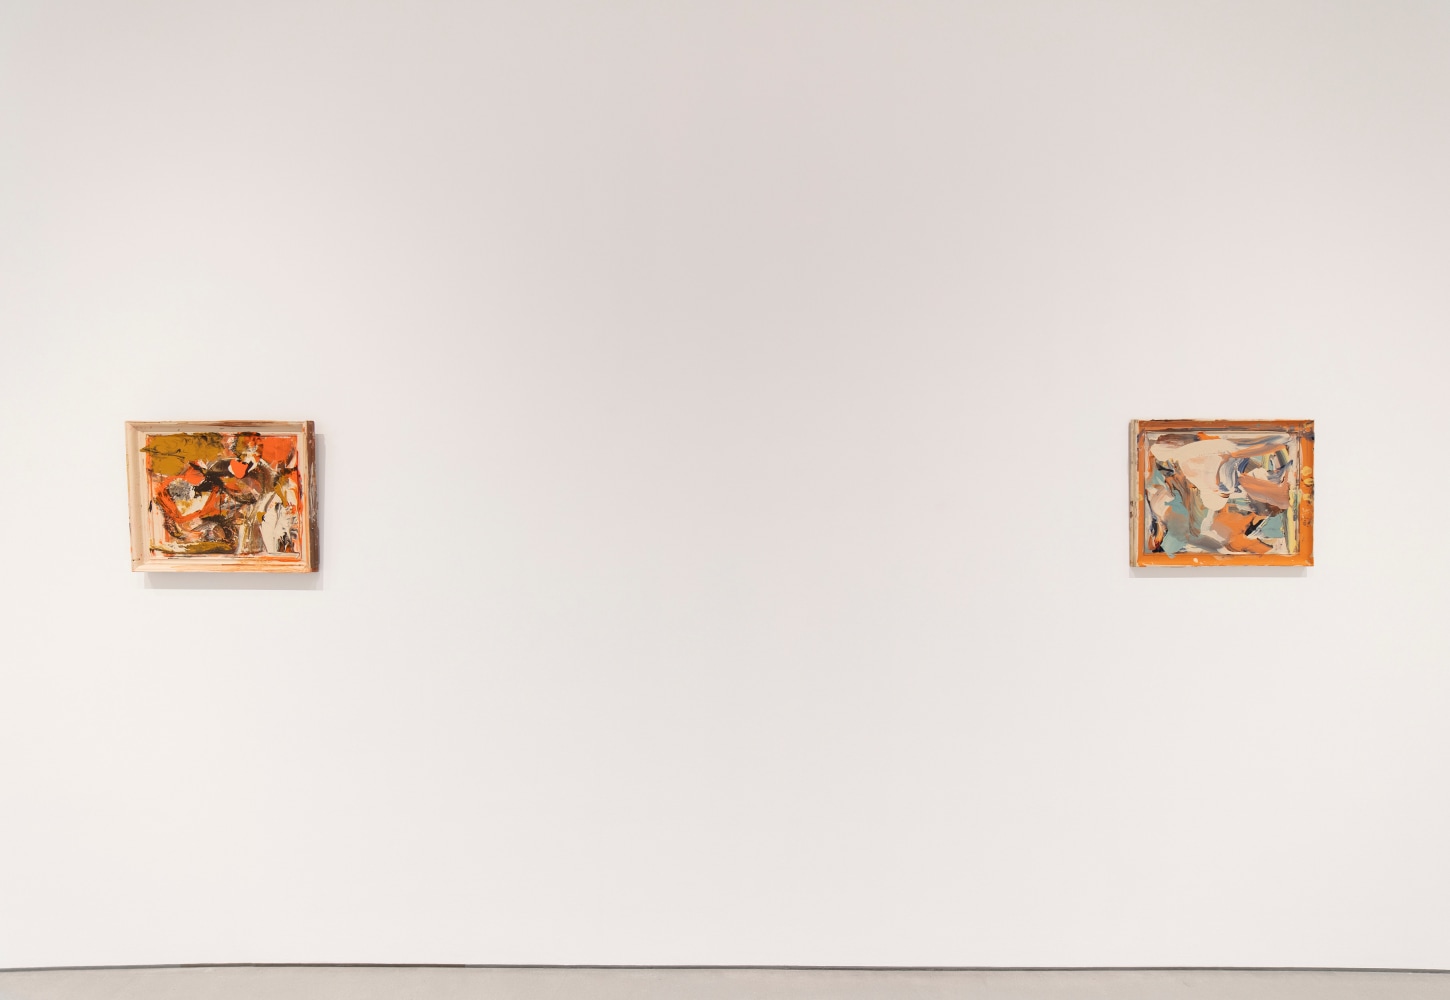 Two predominantly orange horizontal compositions at an intimate scale placed at a distance from each other on a white wall.